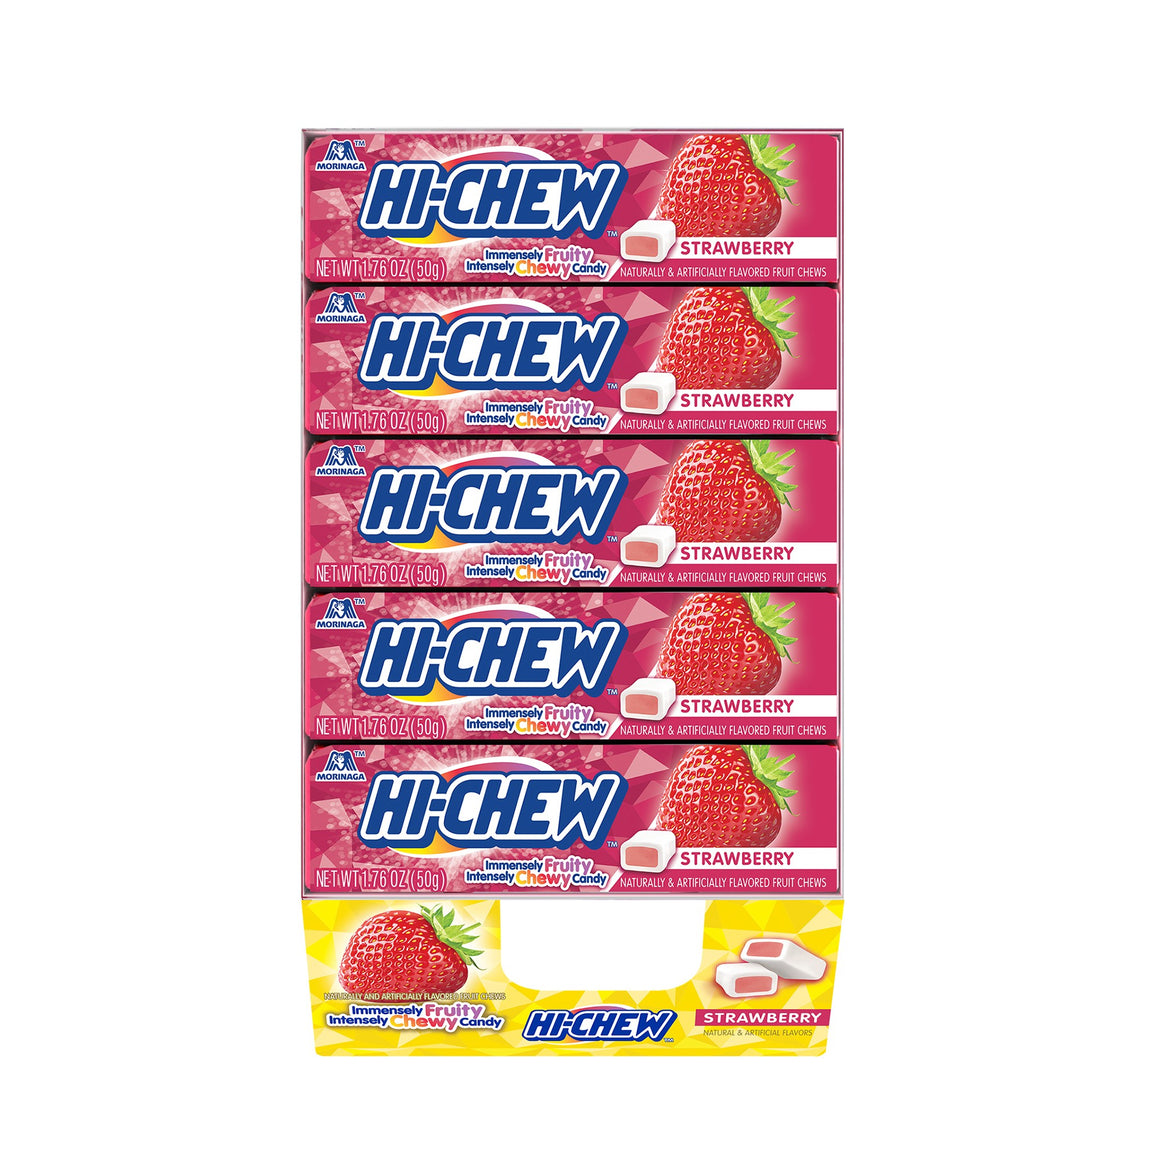 All City Candy Hi-Chew Strawberry Fruit Chews - 1.76-oz. Bar Chewy Morinaga & Company 1 Bar For fresh candy and great service, visit www.allcitycandy.com